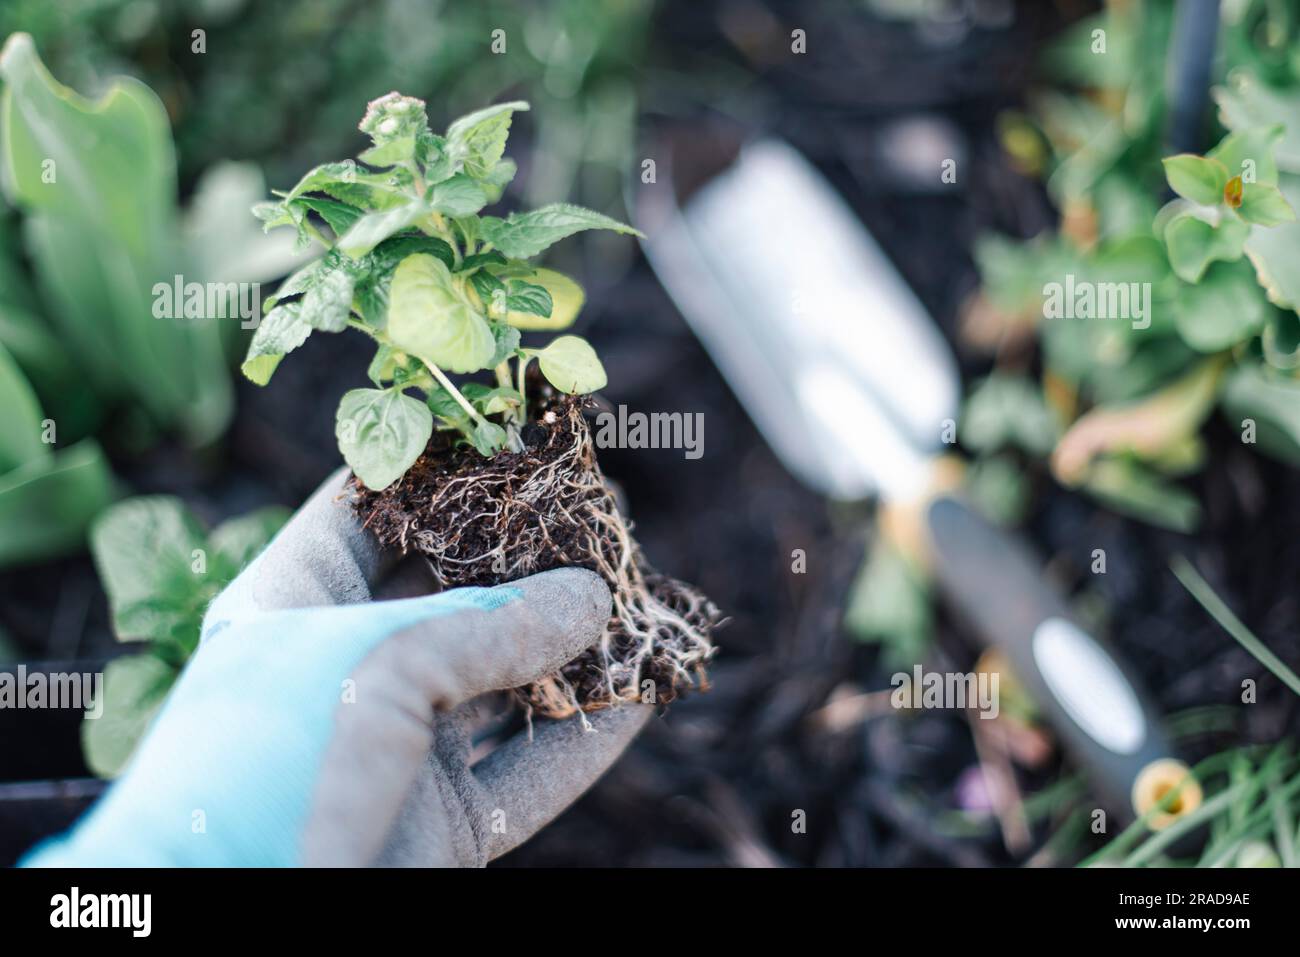 Close up of hand wearing gardening glove holding a new plant. Stock Photo